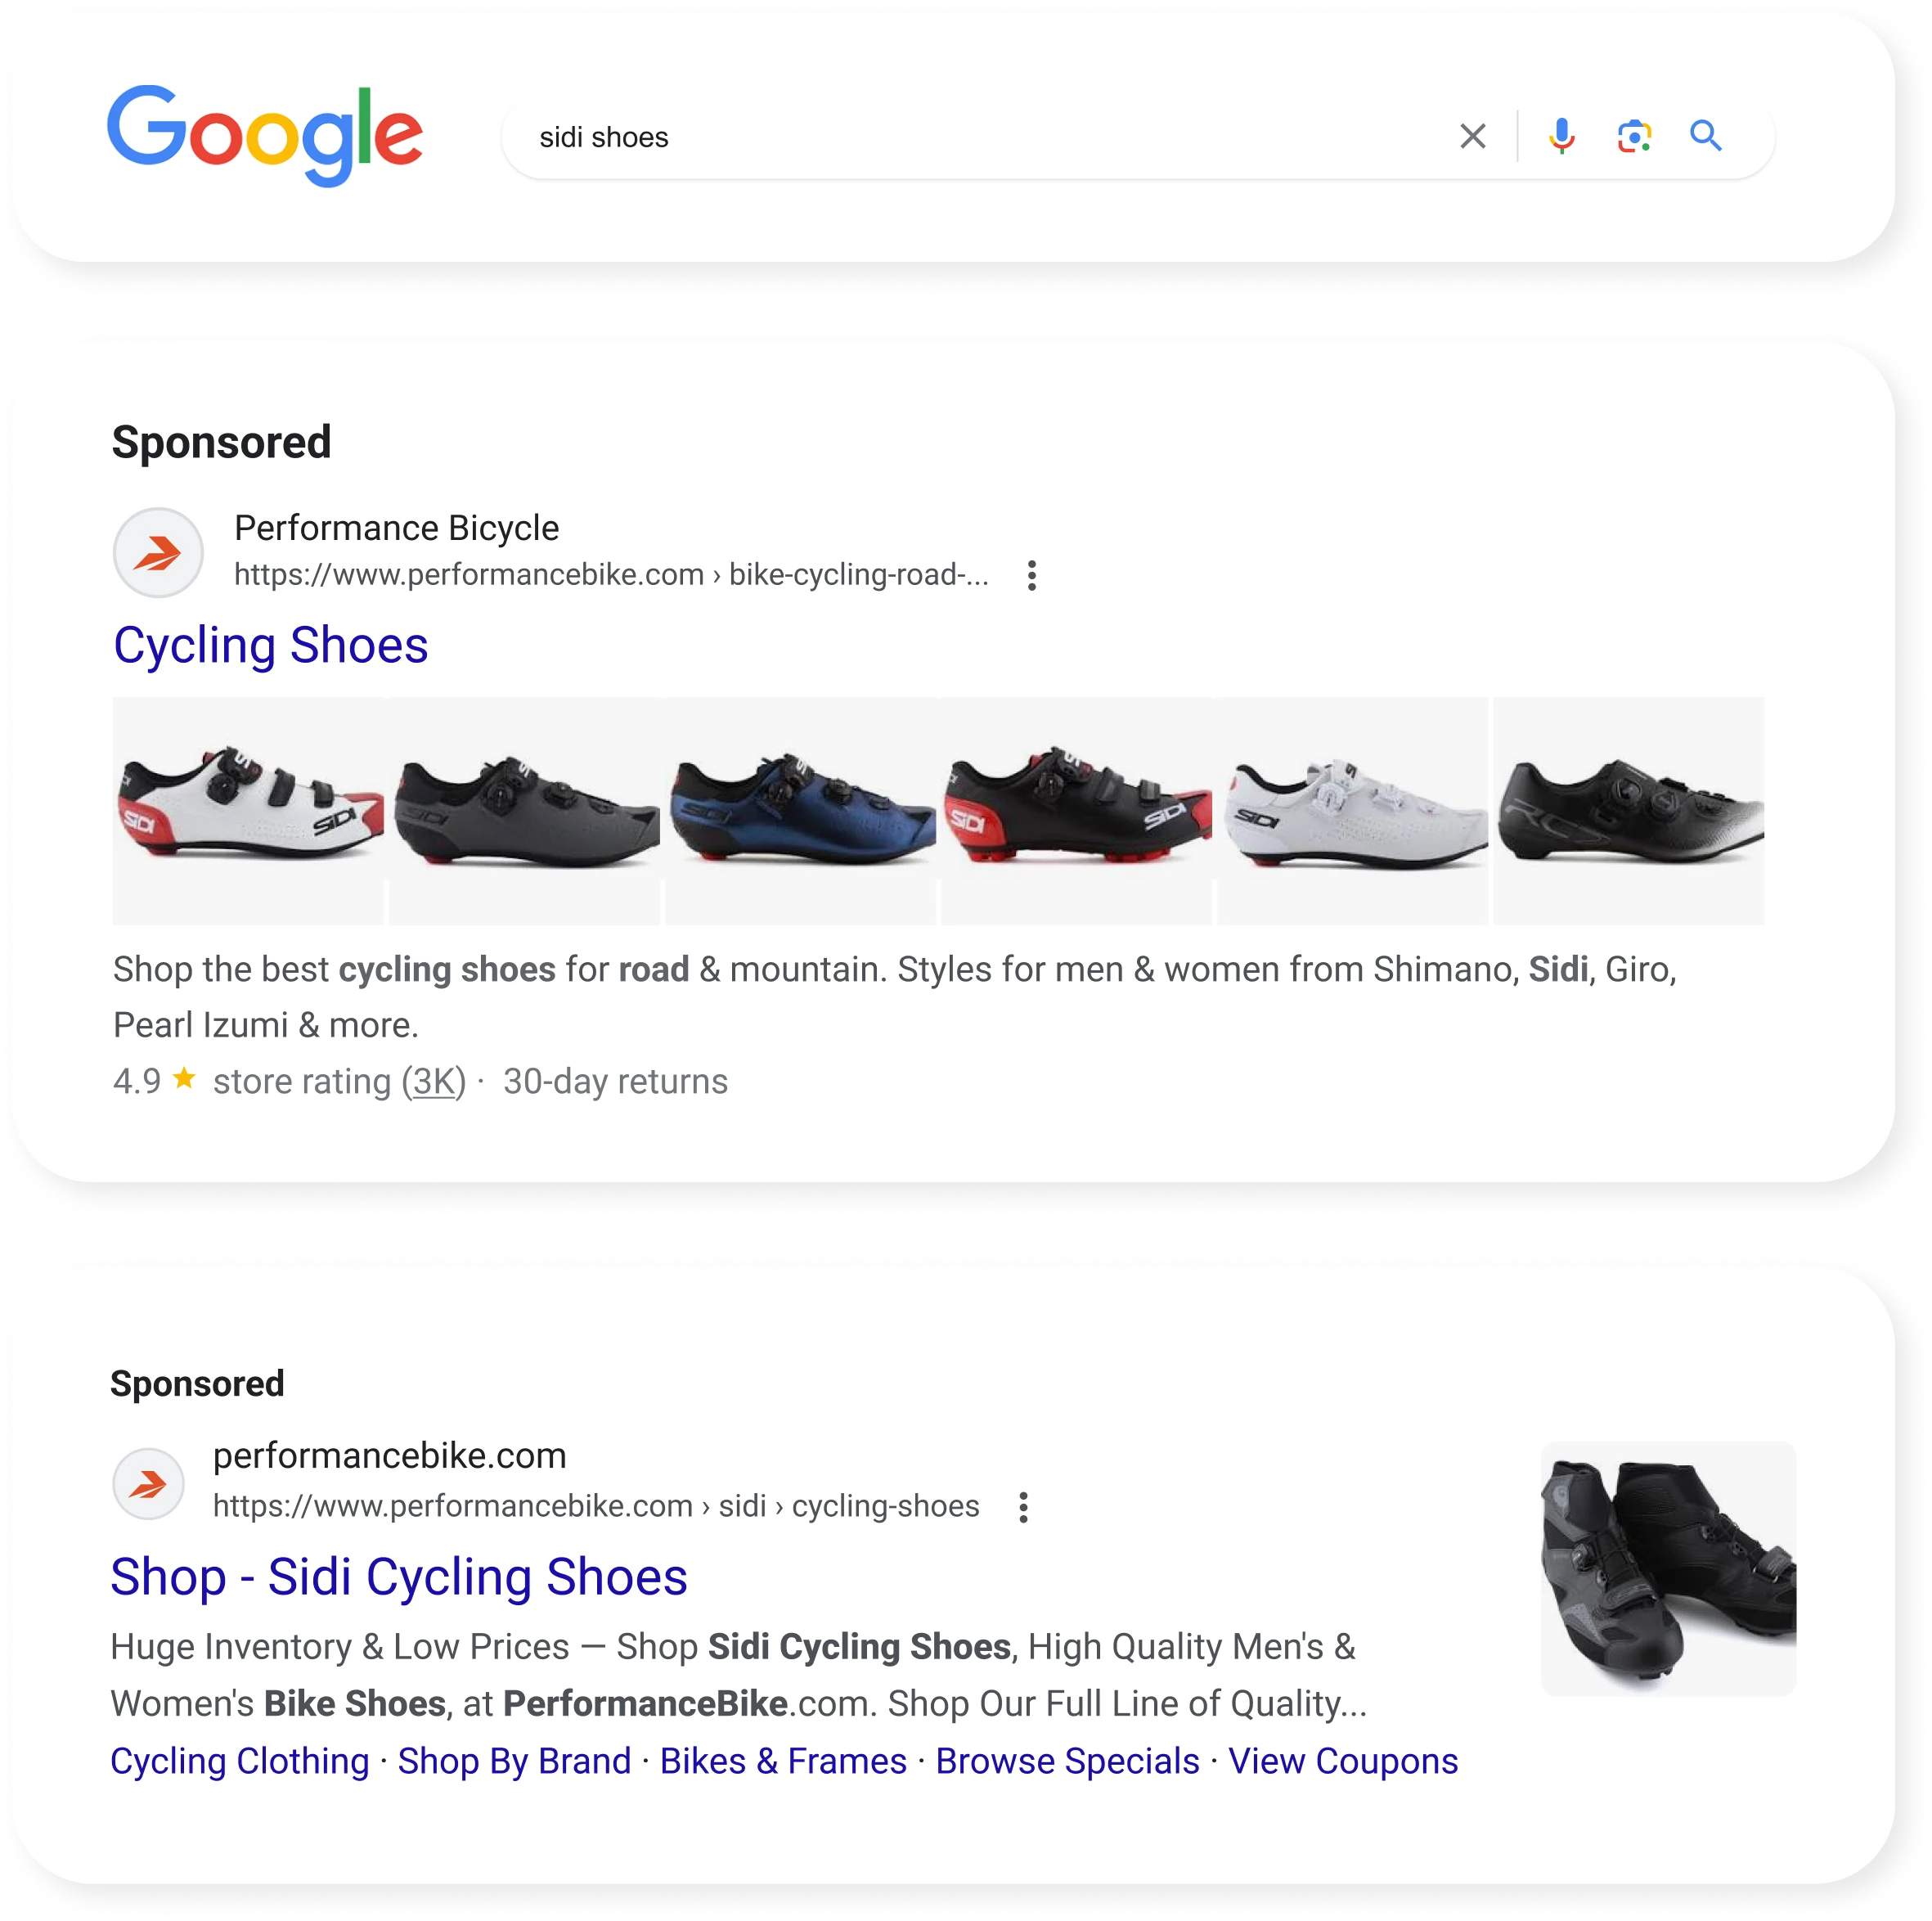 Performance Bicycle's targeted Google Ads campaign featuring cycling shoes and apparel.